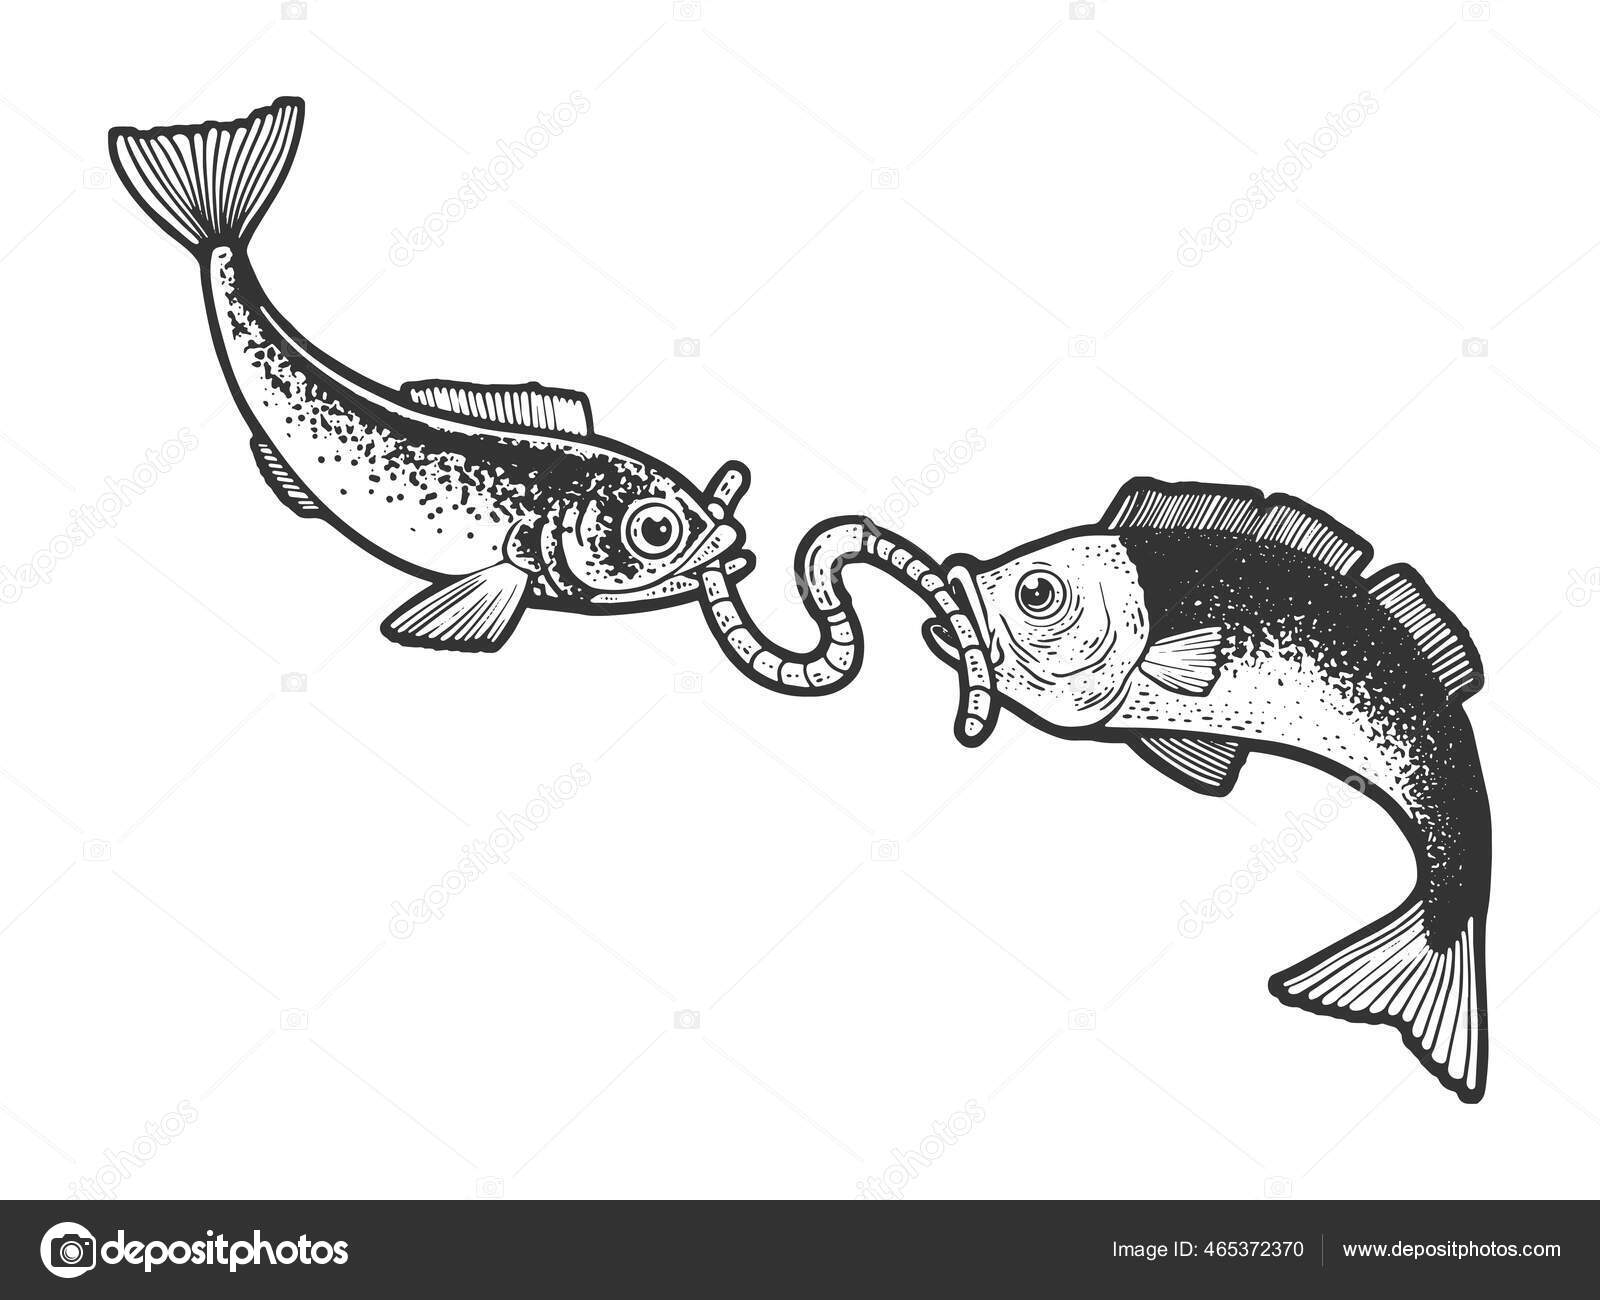 Fish catch bait worm on hook fishing sketch engraving vector